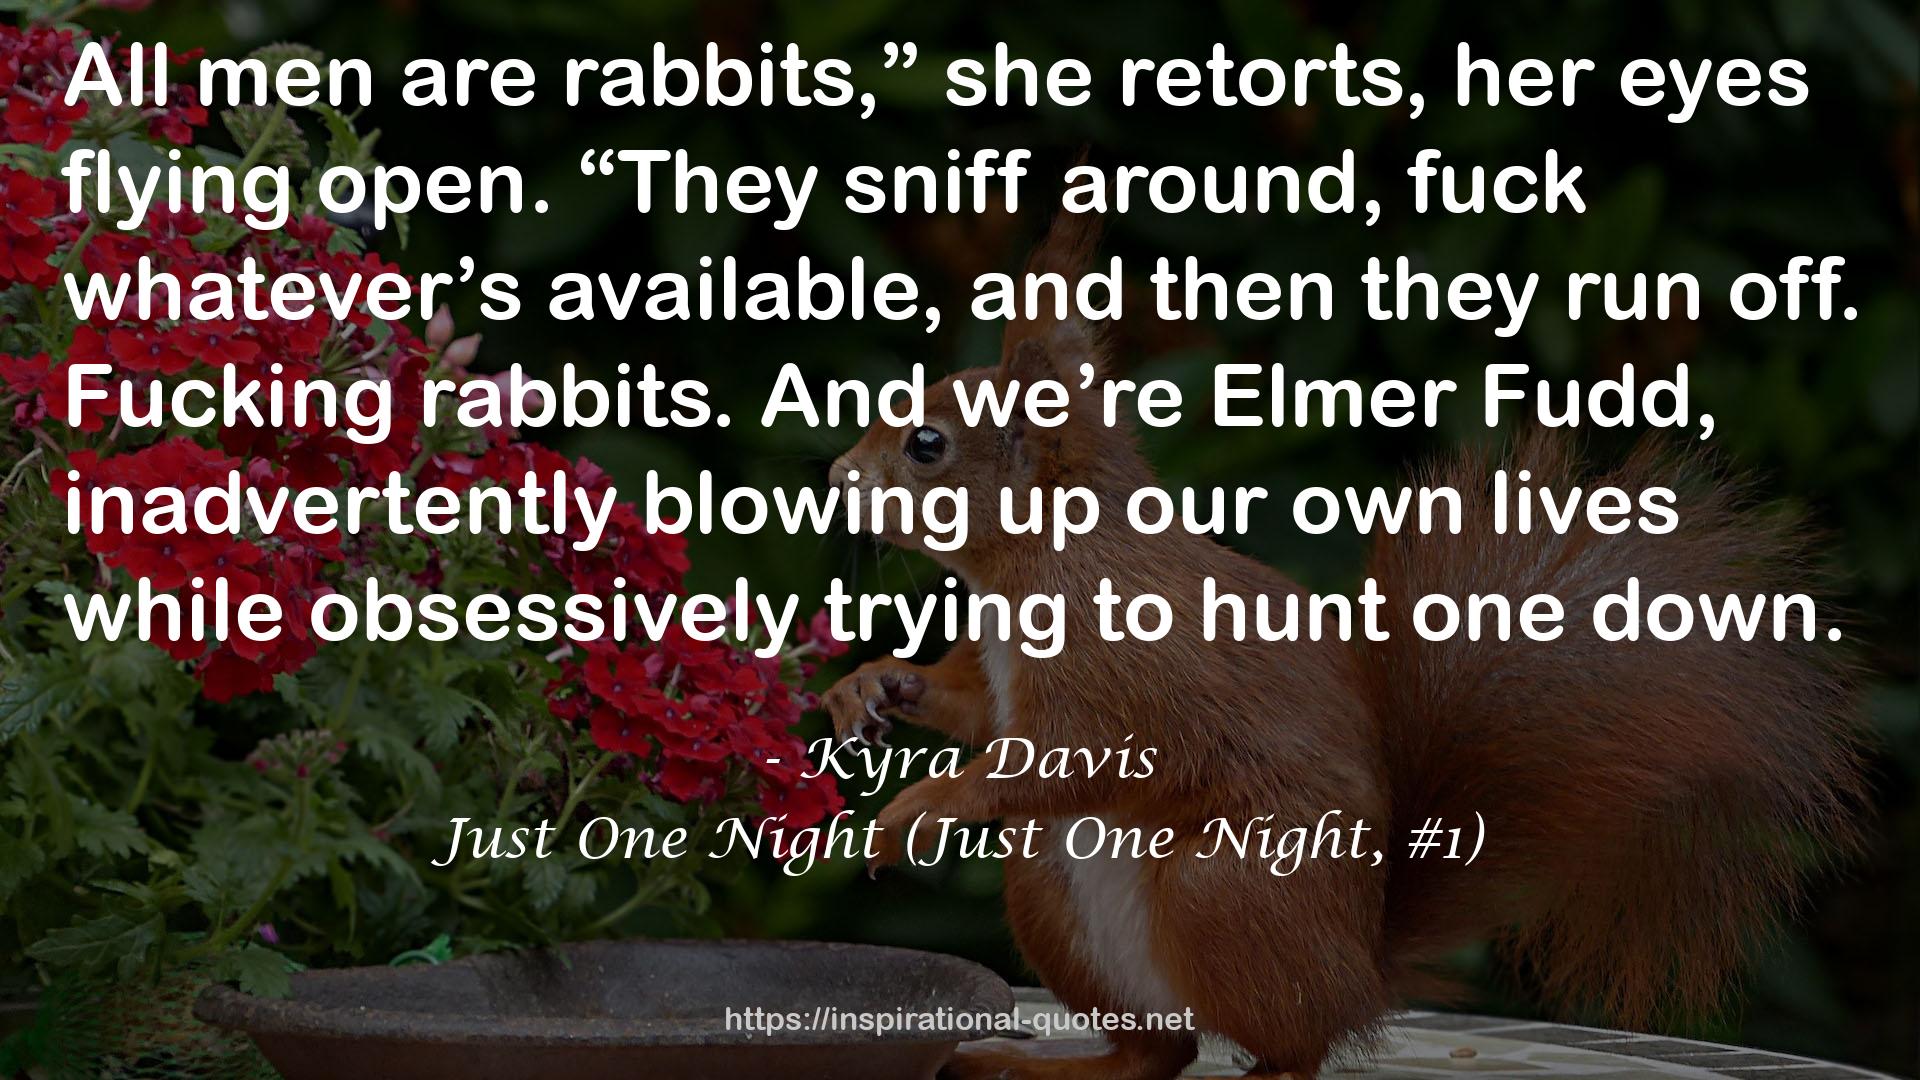 Just One Night (Just One Night, #1) QUOTES